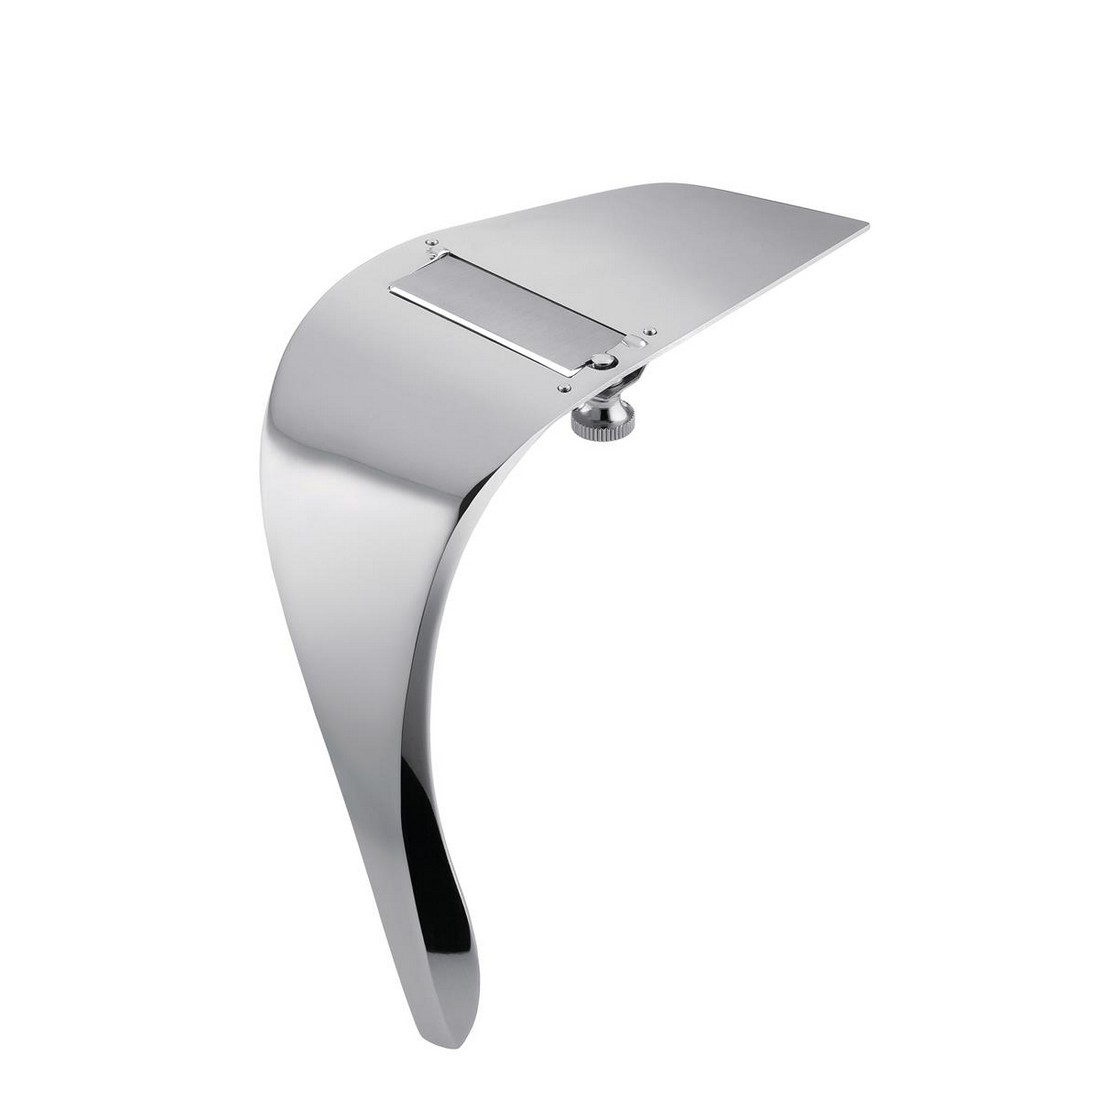 Alessi-Alba Truffle slicer in 18/10 stainless steel